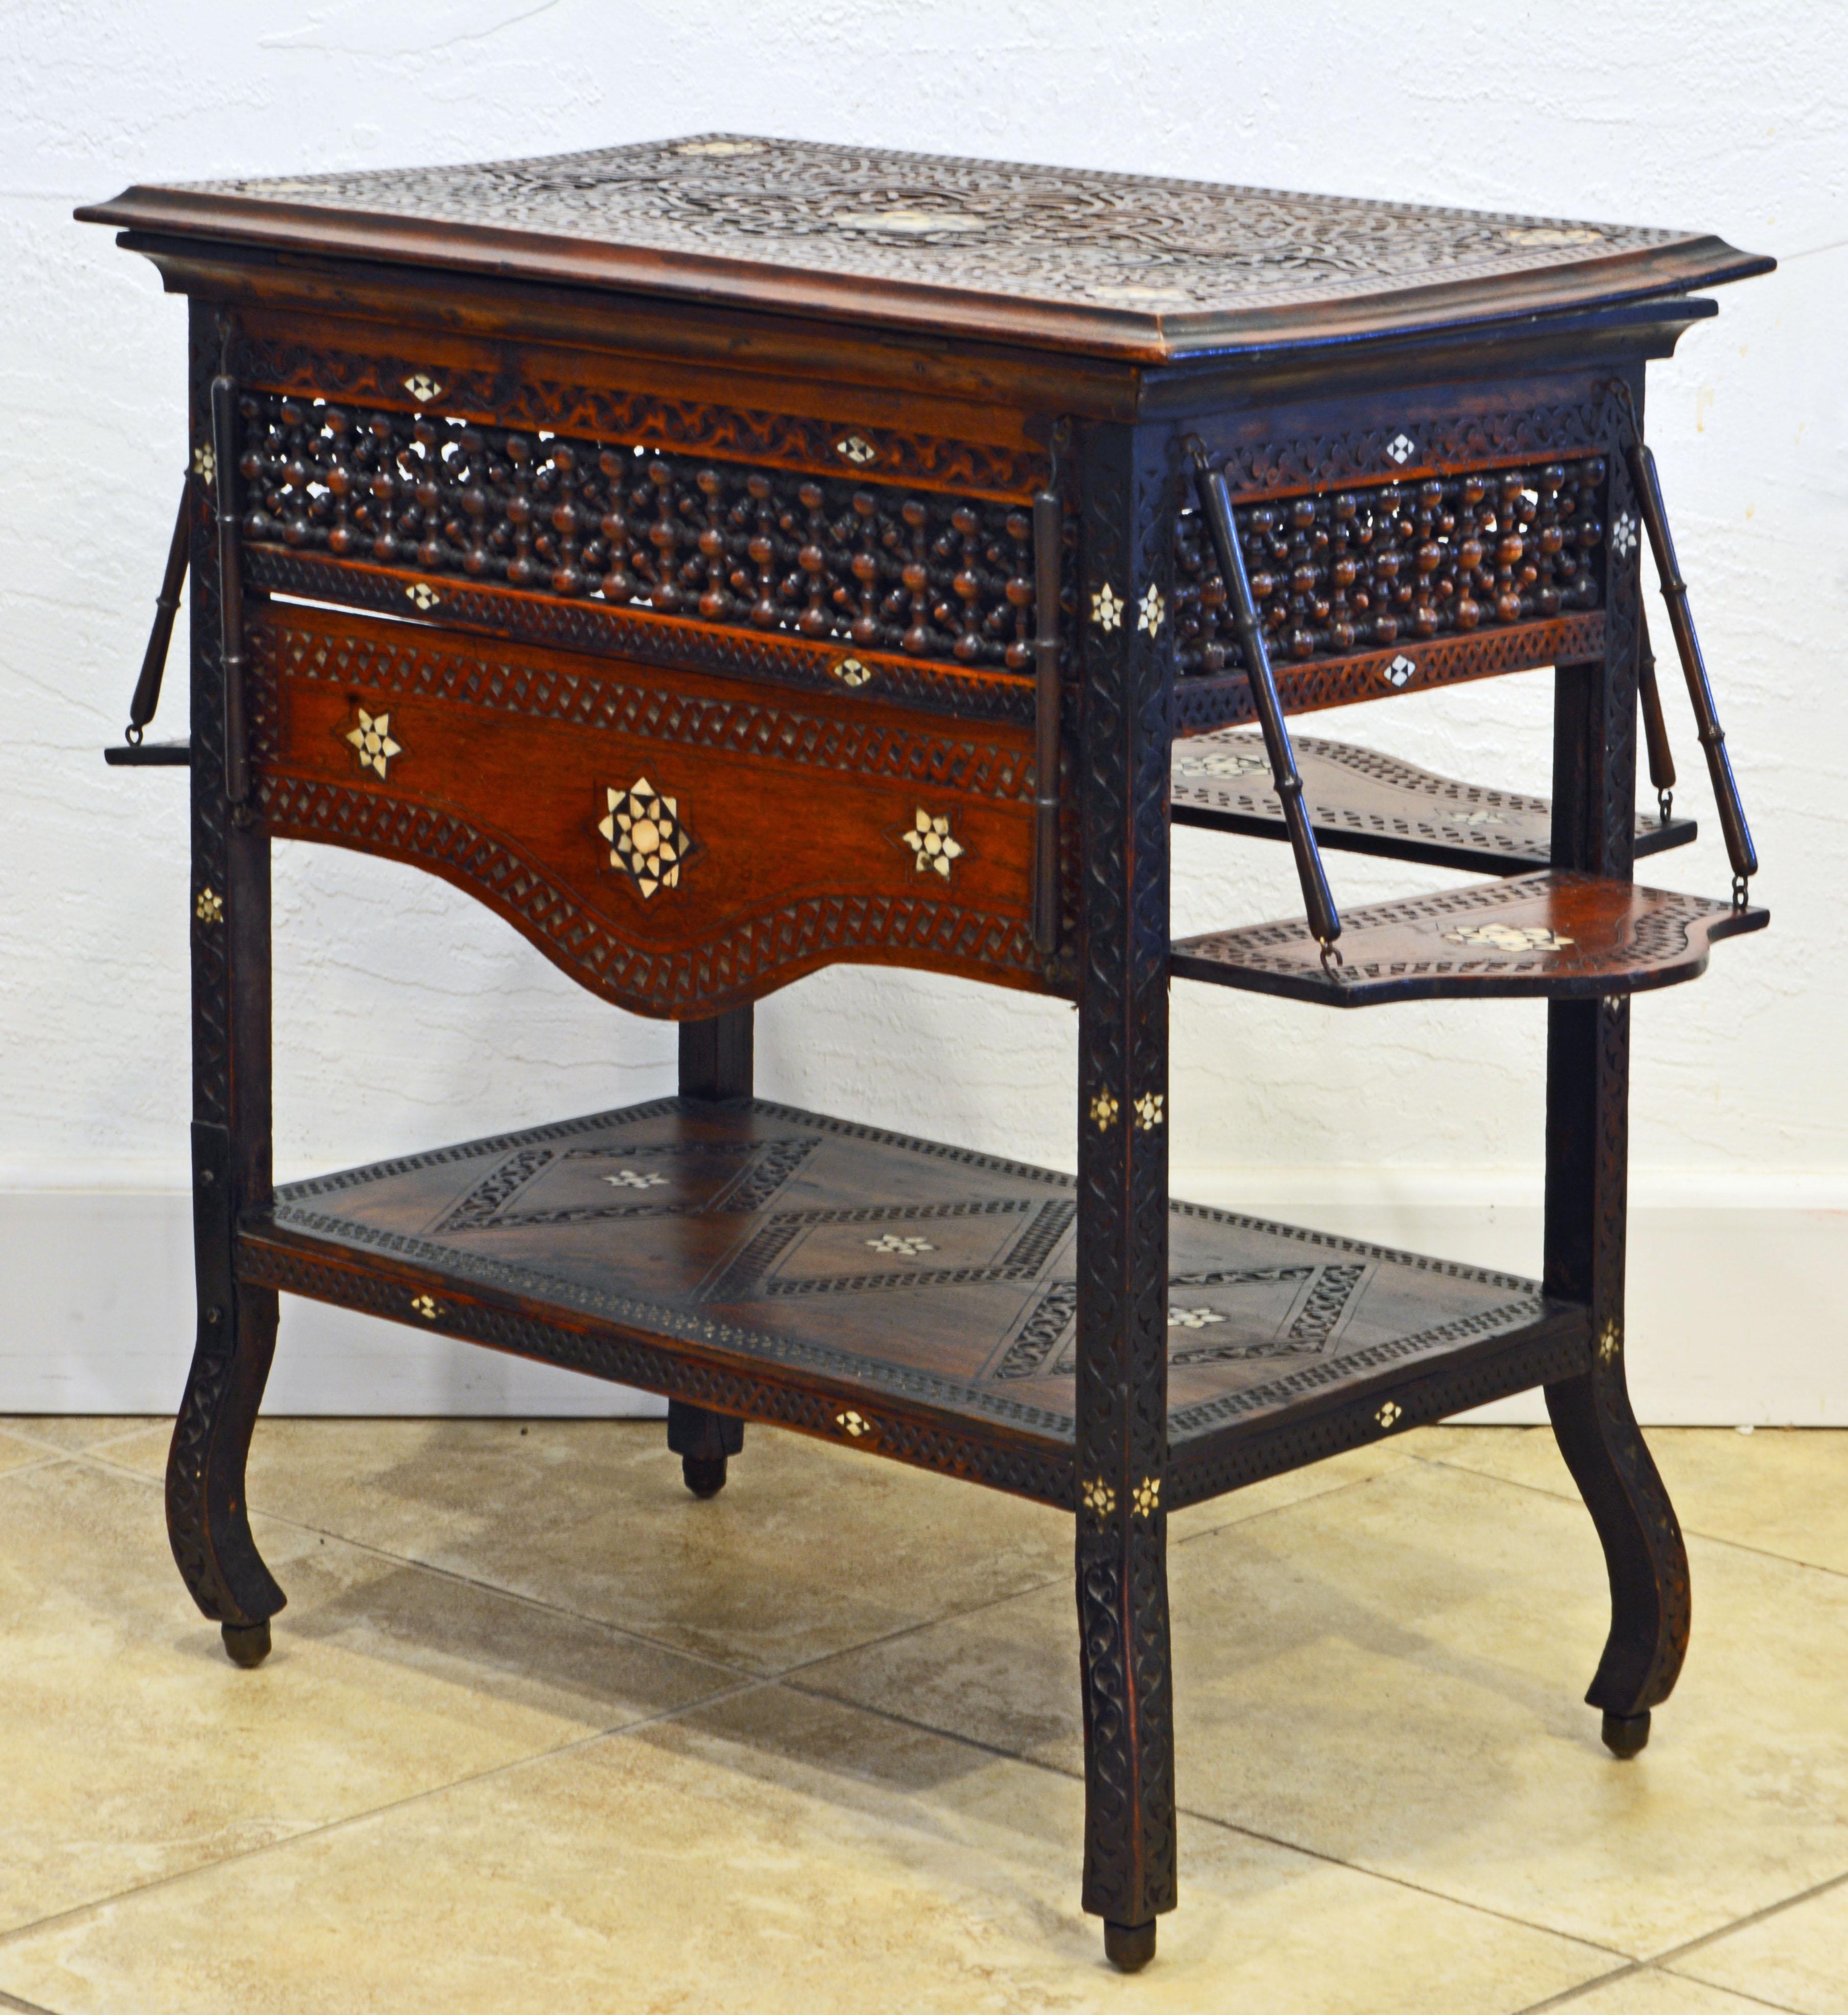 Hand-Carved Moroccan Carved and Mother of Pearl Lift Top Inlaid Table w/ Suspended Shelves